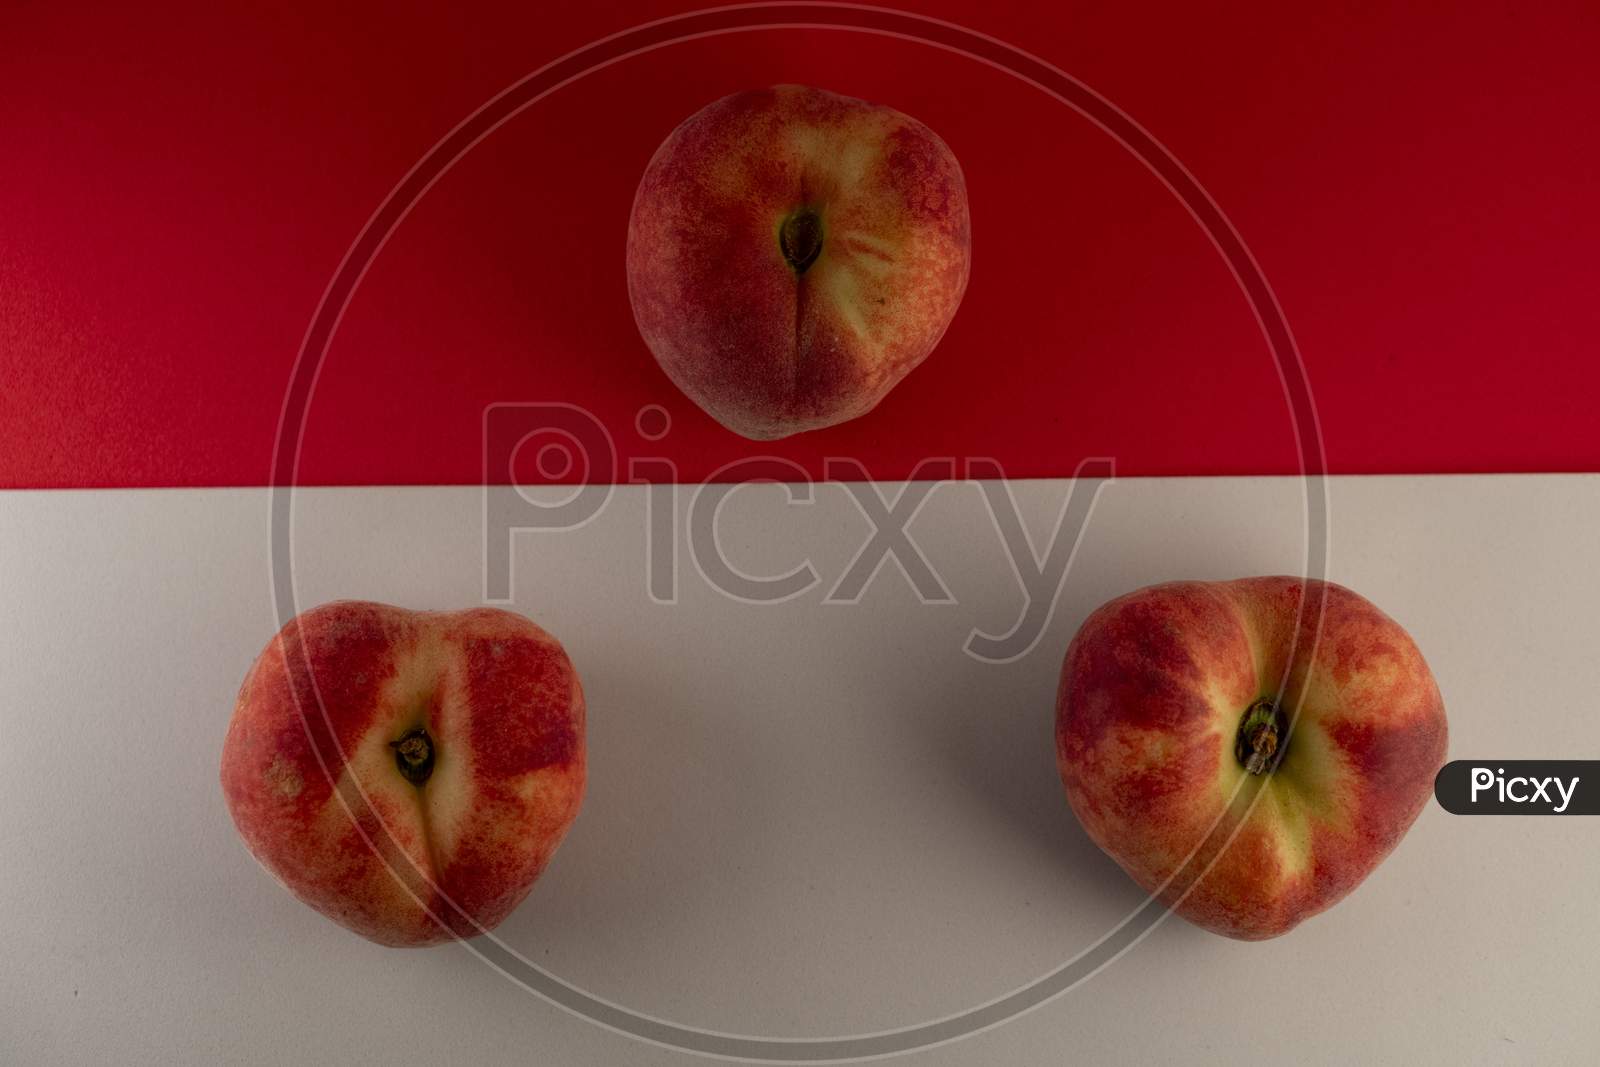 Juicy red peach on a red and white background. Photo has empty space for text.